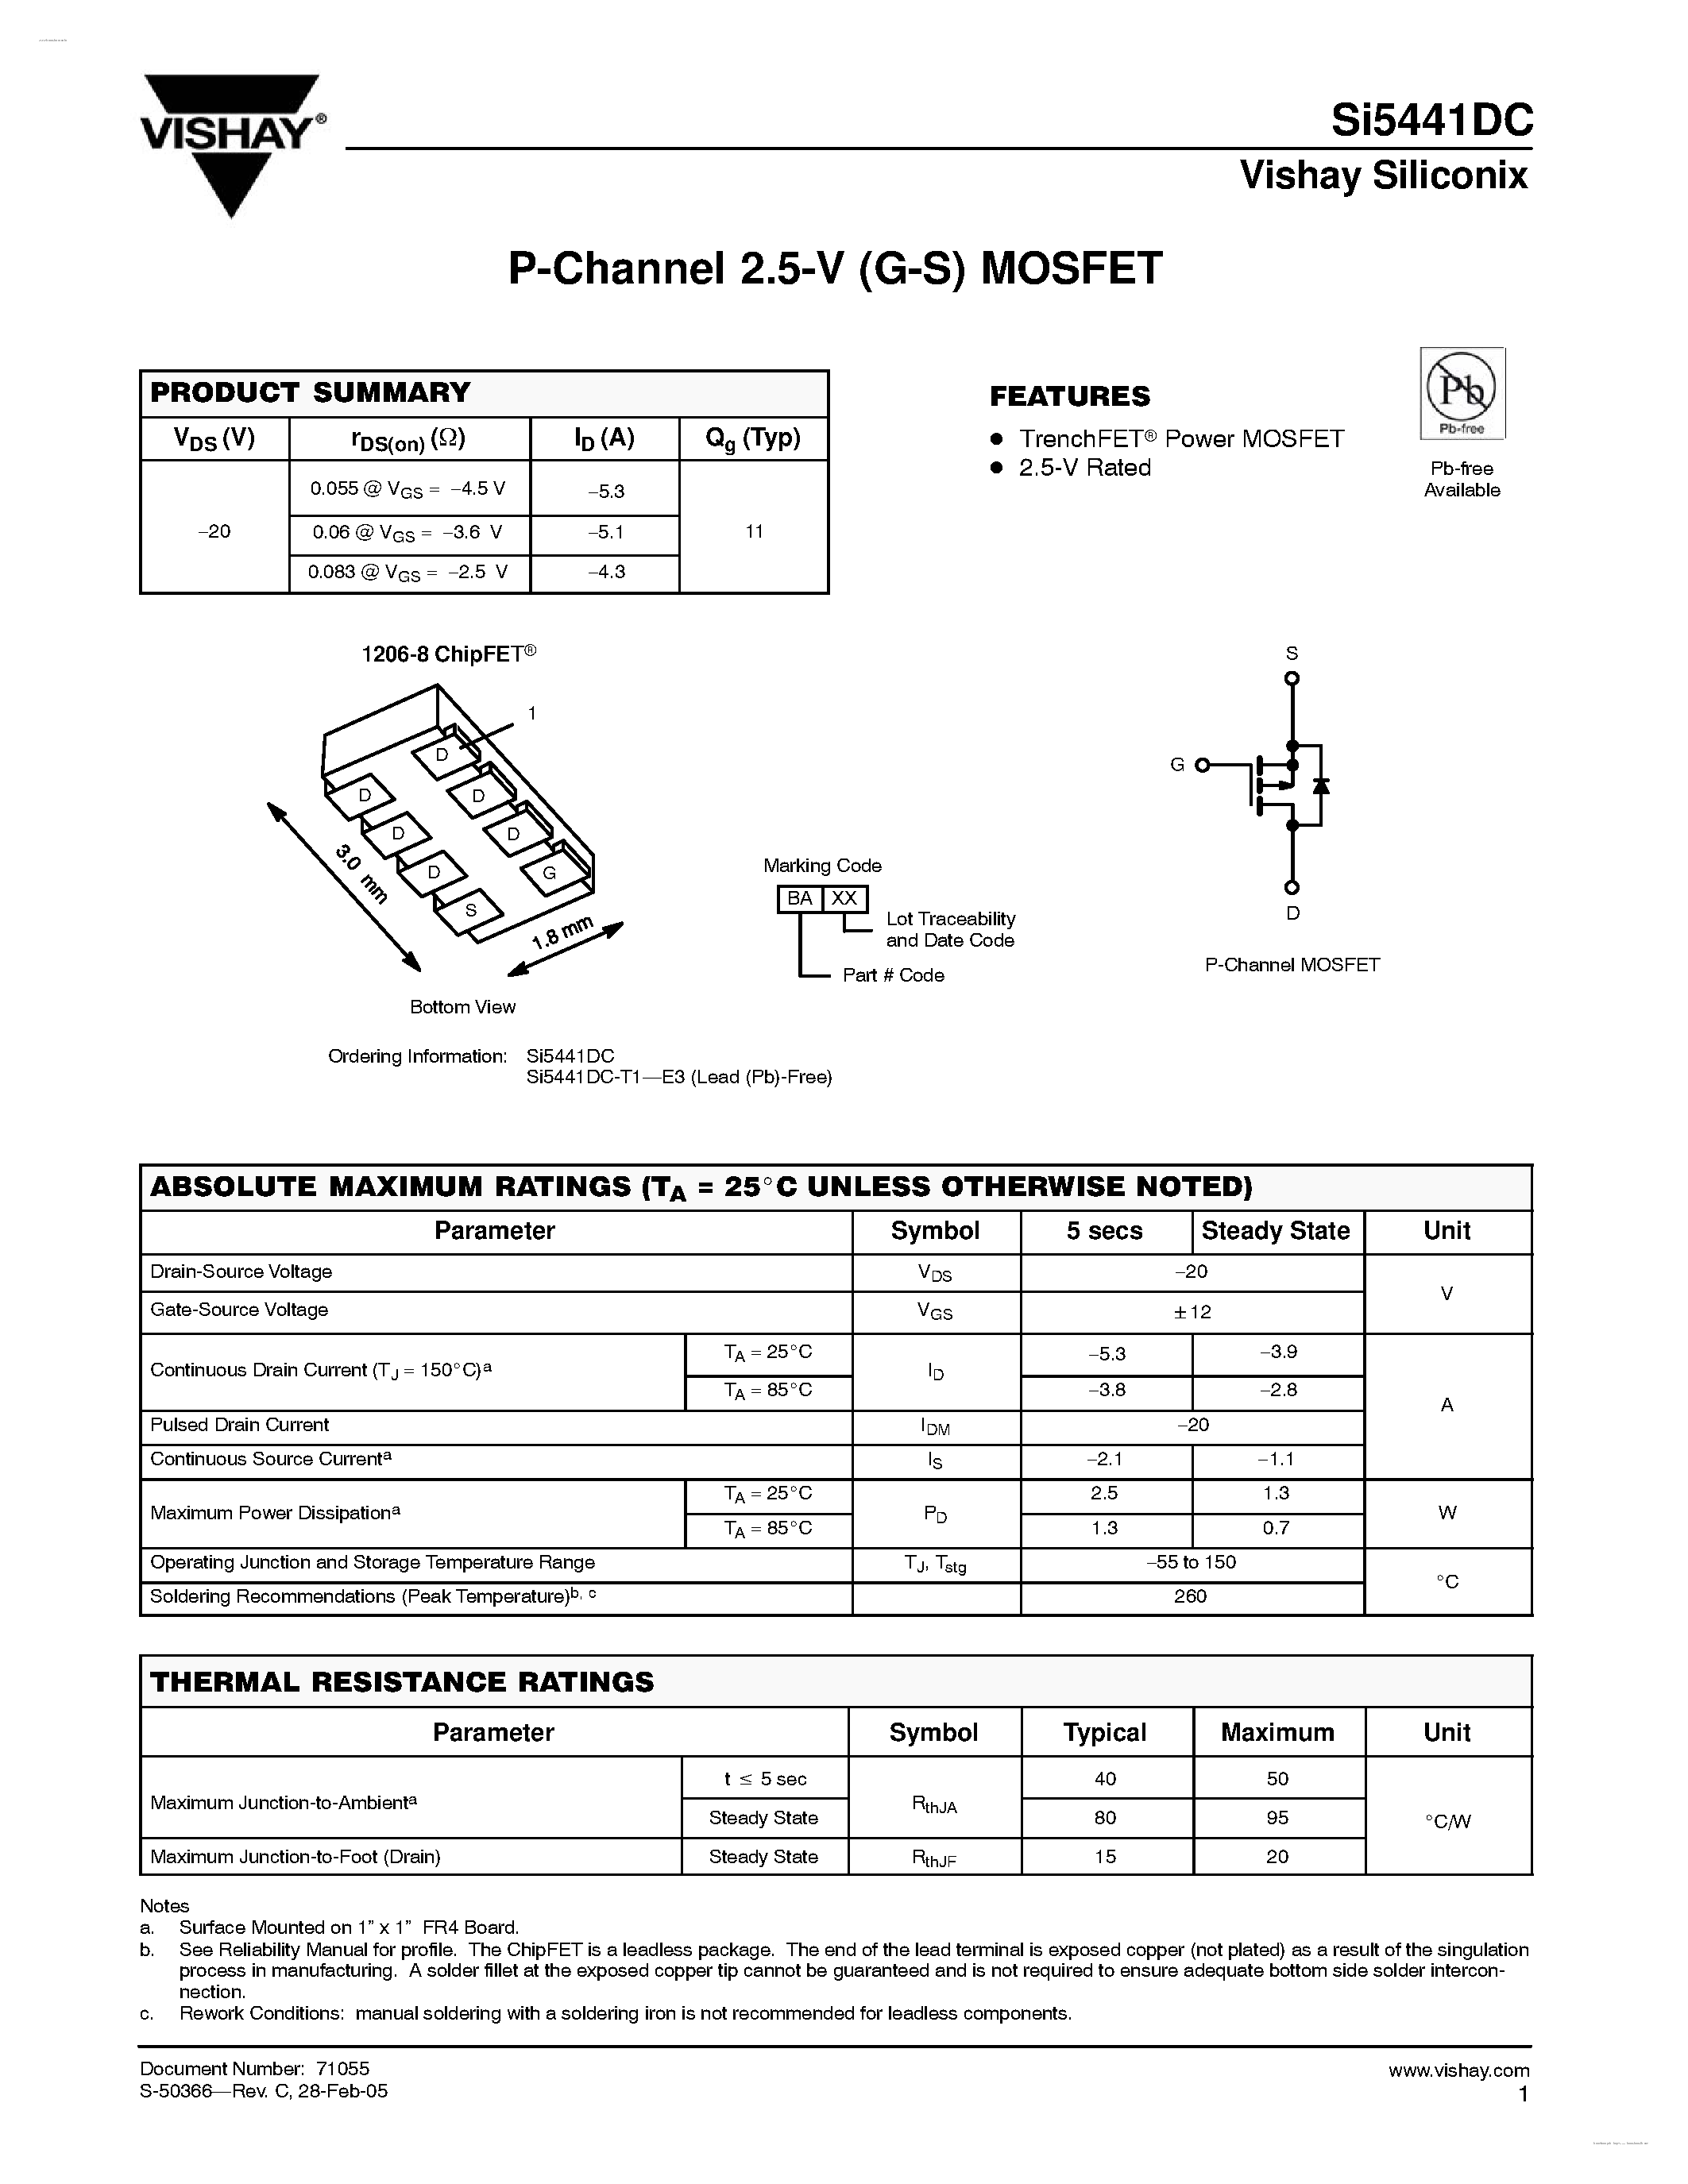 Datasheet SI5441DC - P-Channel 2.5-V (G-S) MOSFET page 1